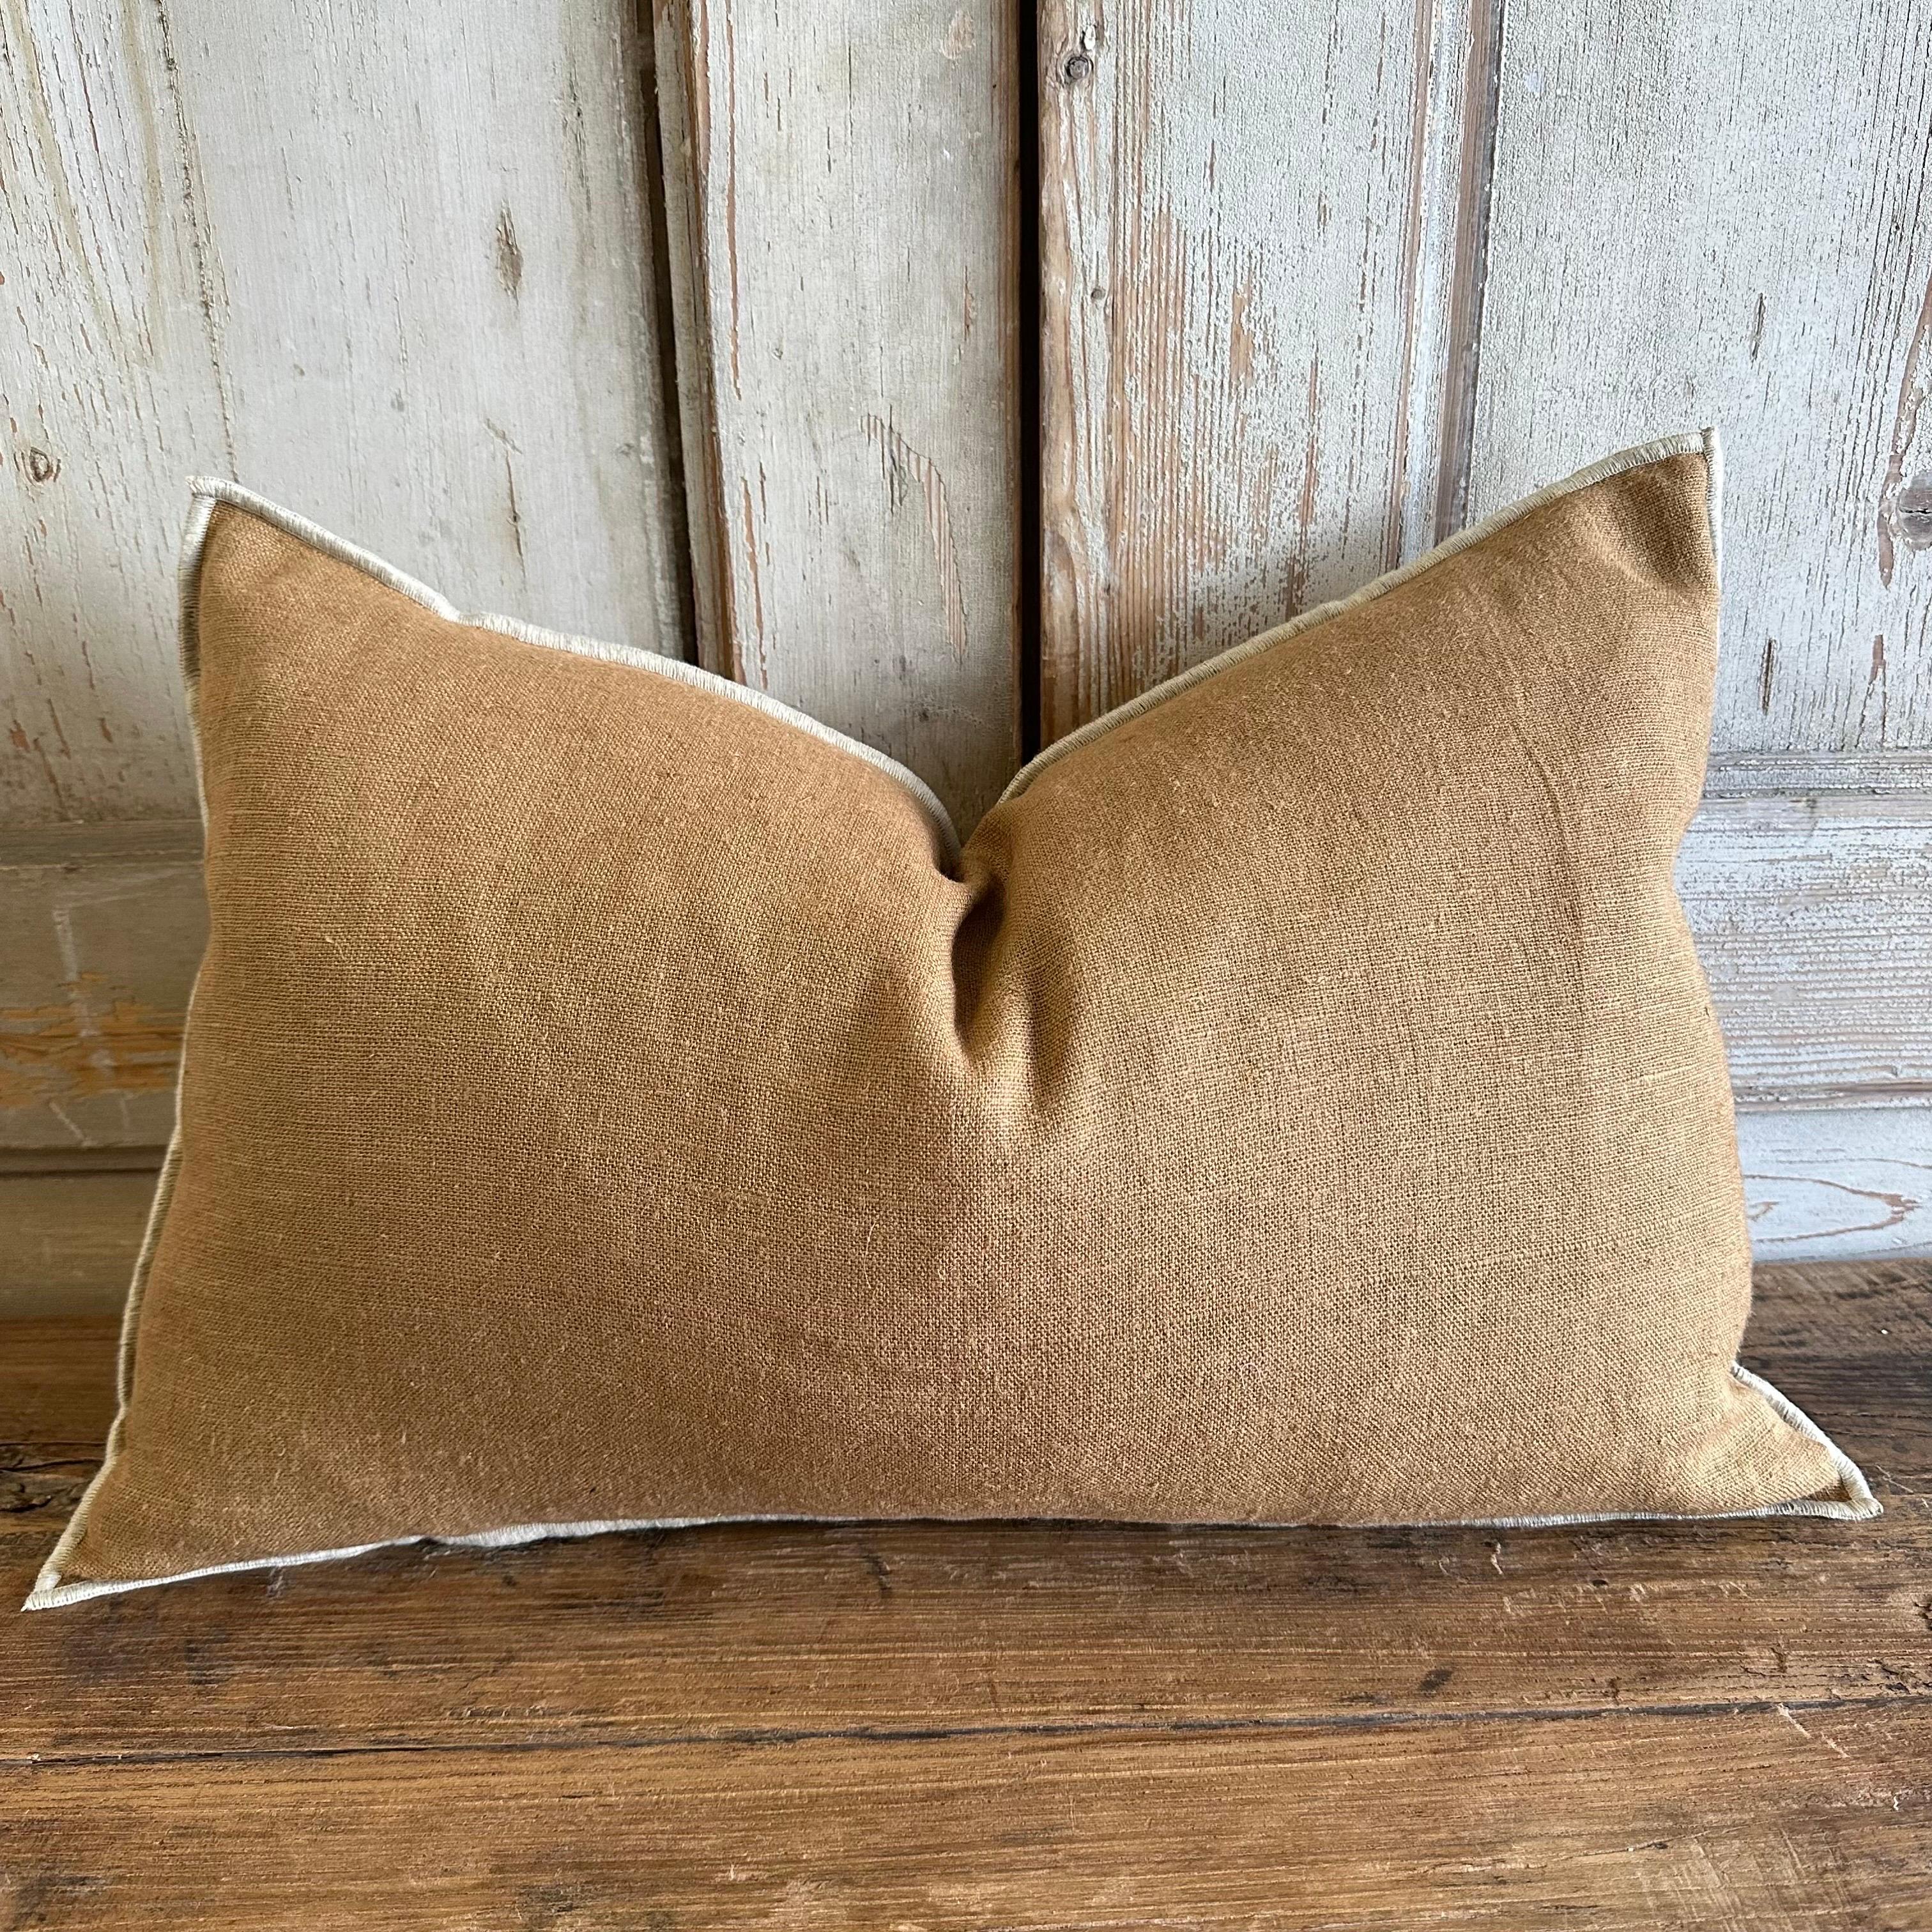 A Beautiful 100% linen pillow with decorative stitched edge. Zipper closure, 90/10 down feather pillow is included.
Size: 16x24
Color: Natural 
Composition
100% linen, natural finish, european flax label
Made in France